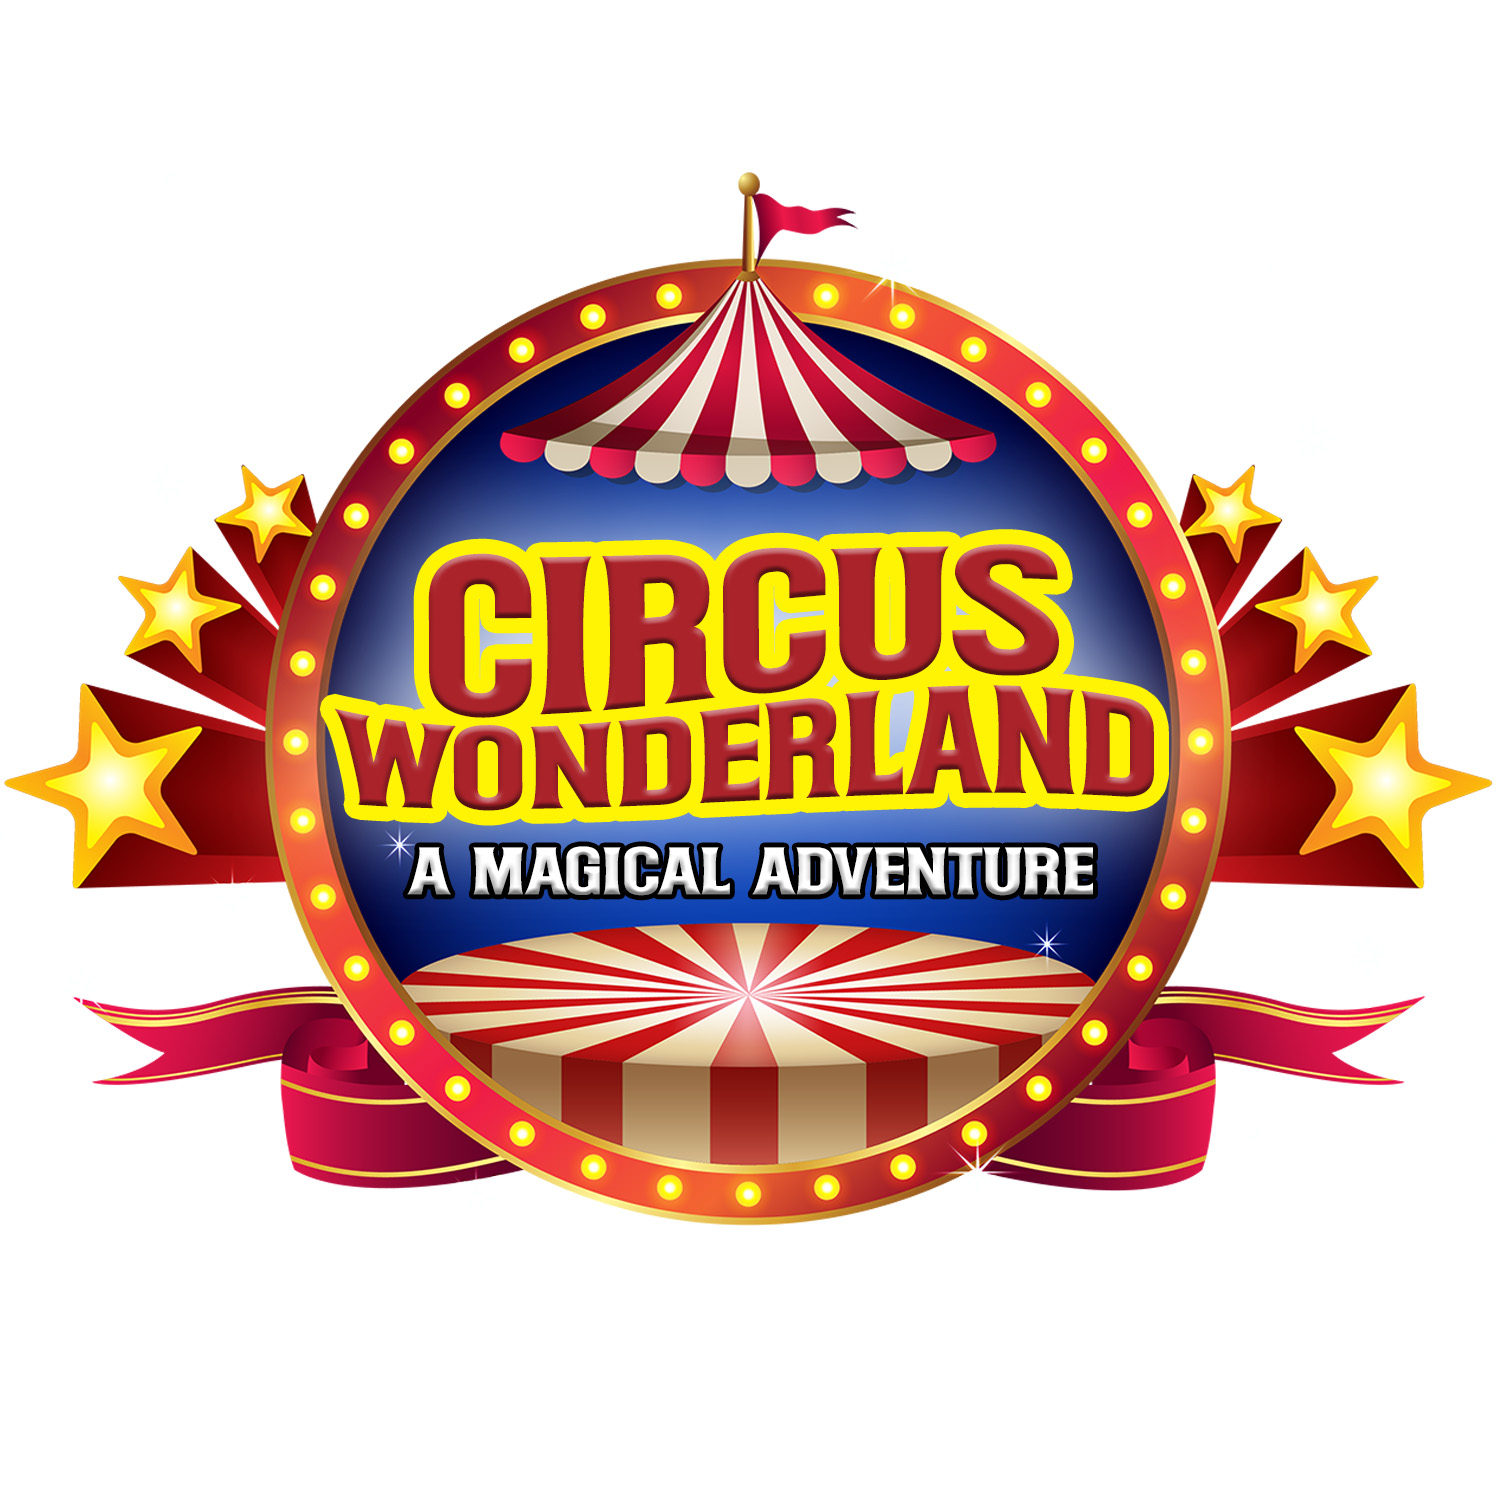 Circus Wonderland - A Magical Adventure logo. Colorful red and yellow circus theme logo with big top tent and starts.